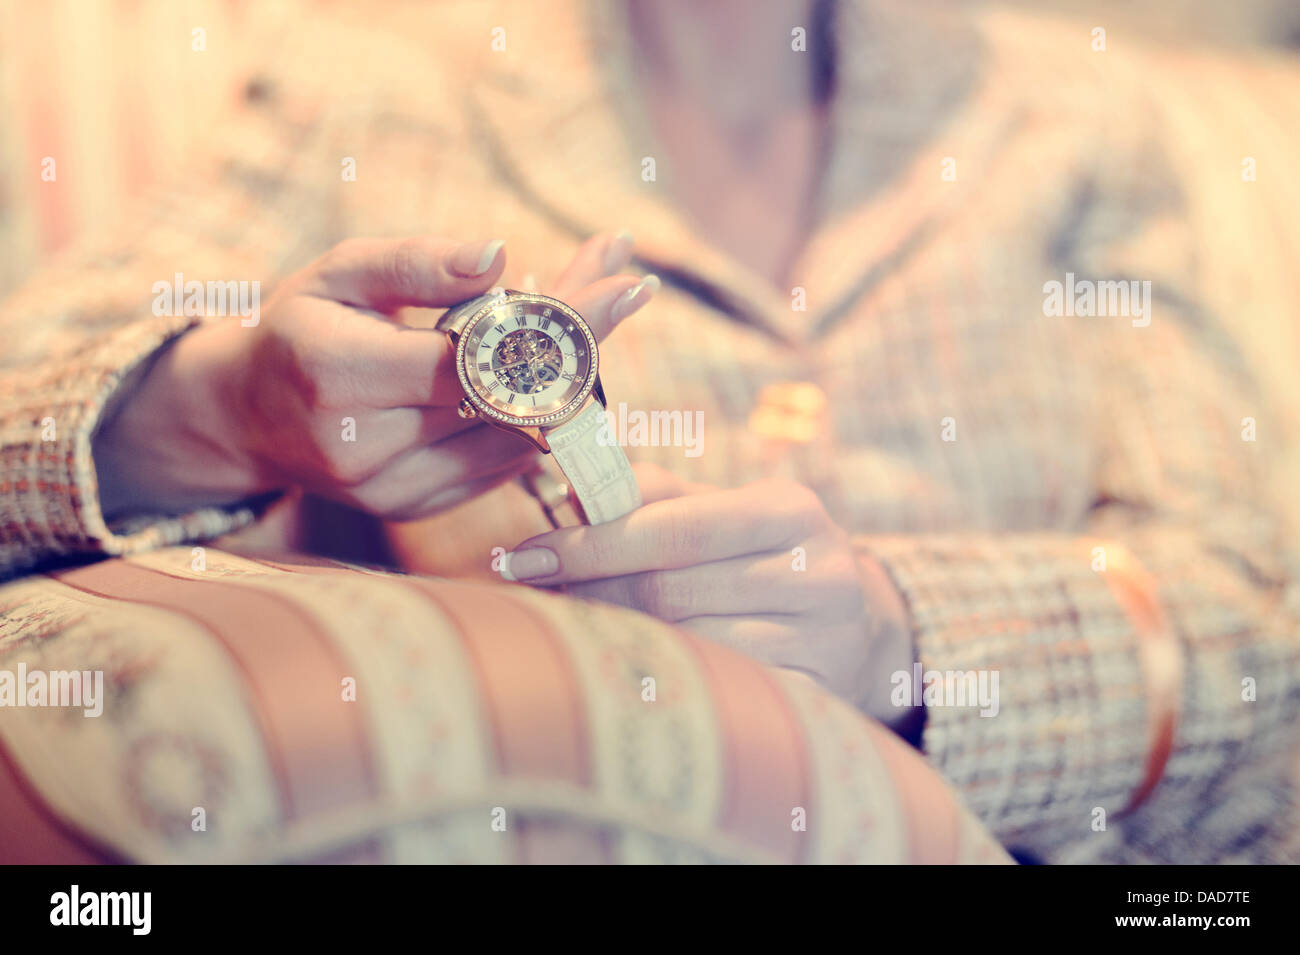 Luxury - Close up of woman with a wrist watch Stock Photo